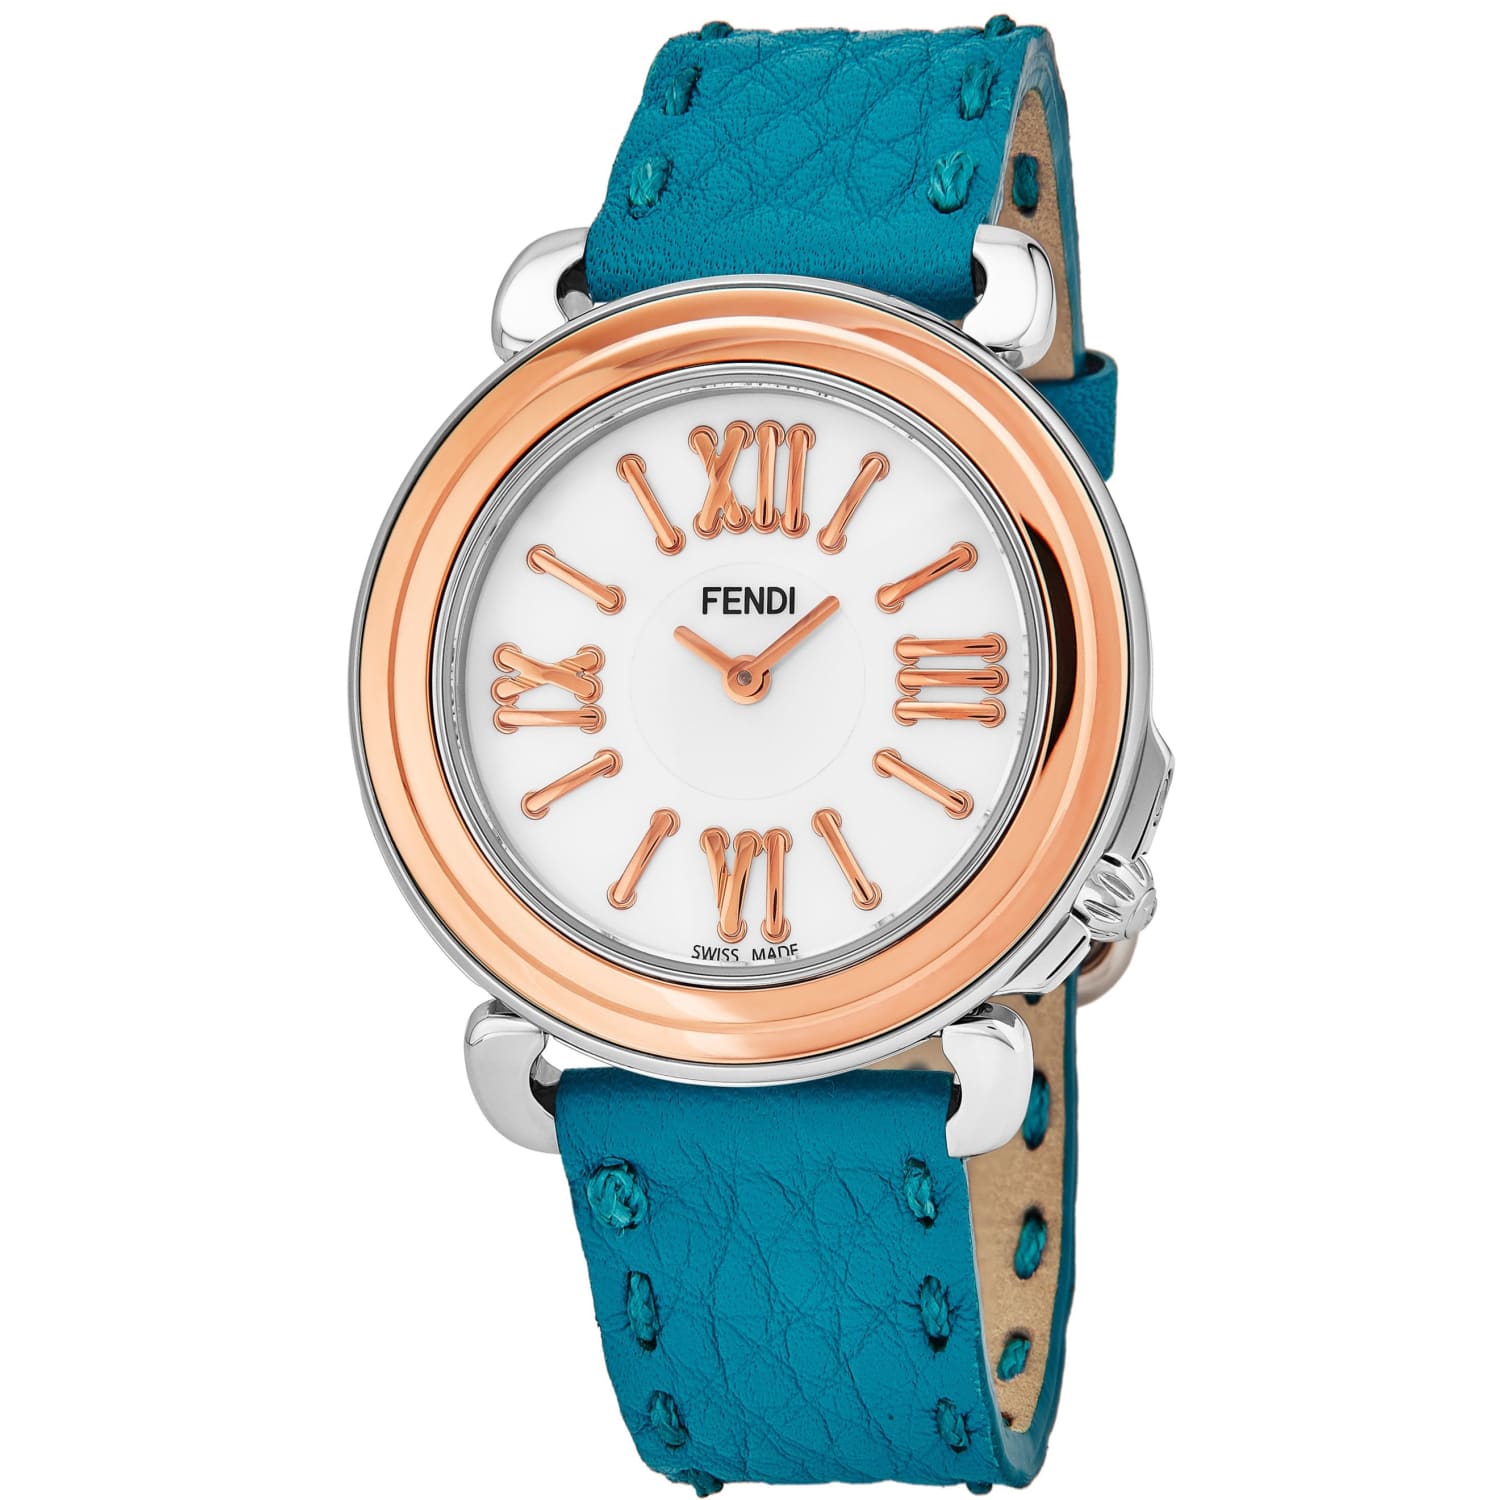 Fendi Women's 'Selleria' Mother Of Pearl Dial Teal Blue Leather Strap ...